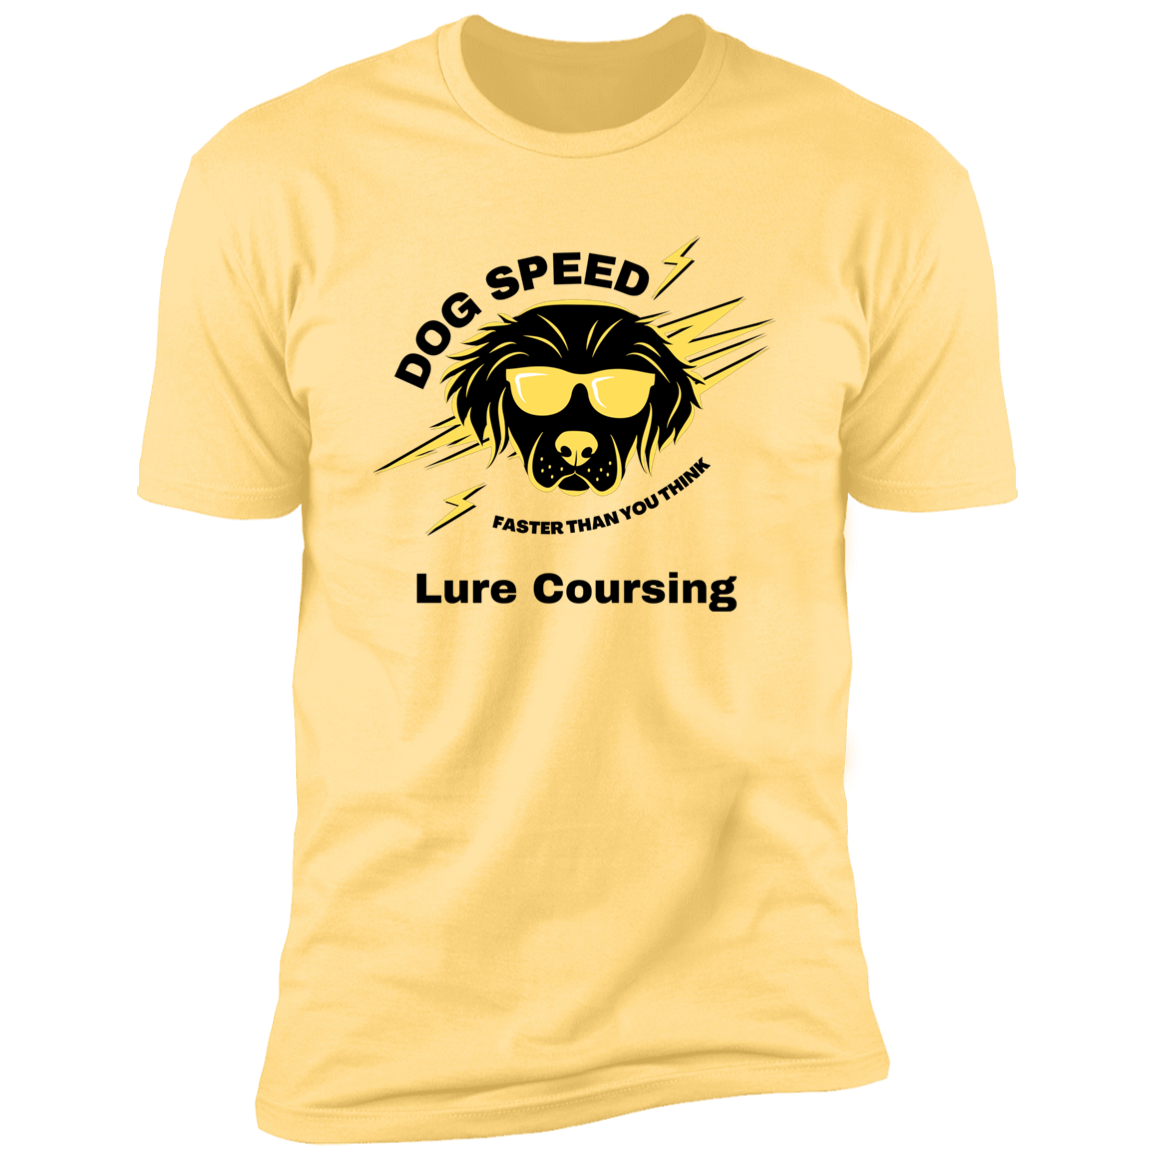 Dog Speed Faster Than You Think Lure Coursing T-shirt, Lure Coursing shirt dog shirt for humans, in banana cream